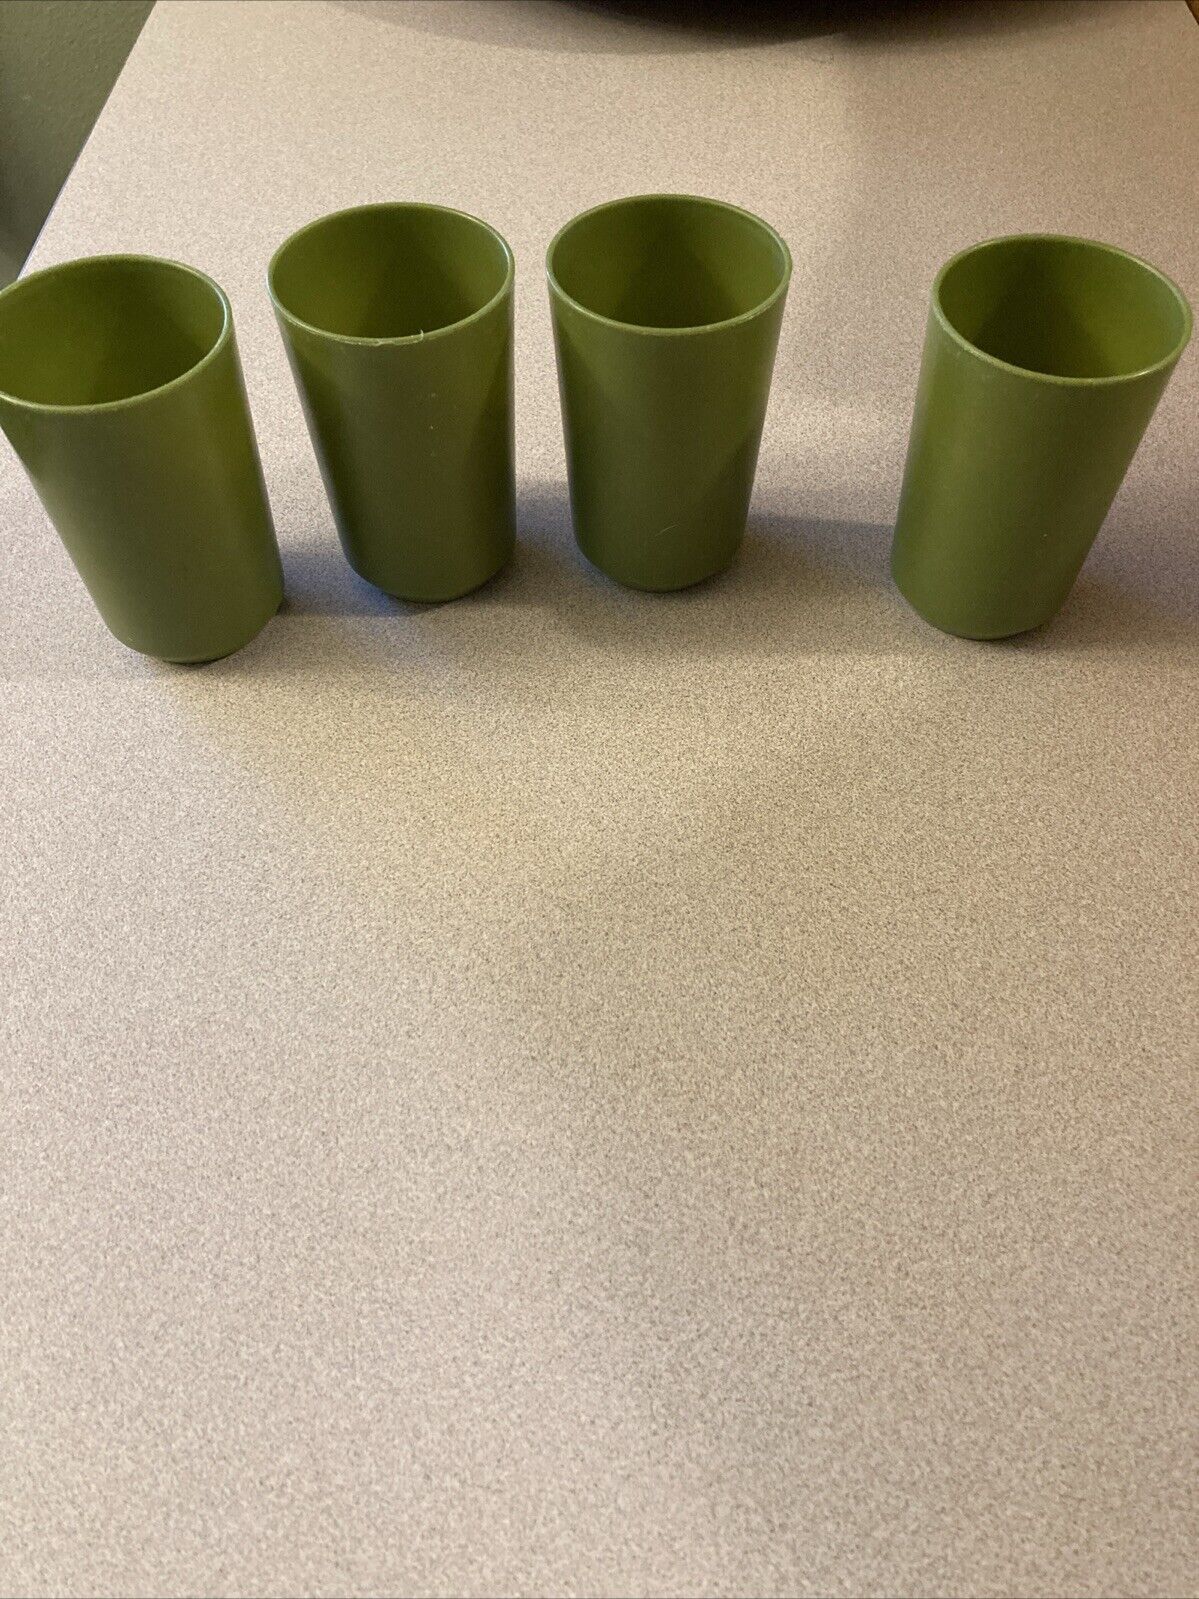 4 VINTAGE RUBBERMAID PARTY PLAN GREEN 8OZ TUMBLERS STACKABLE